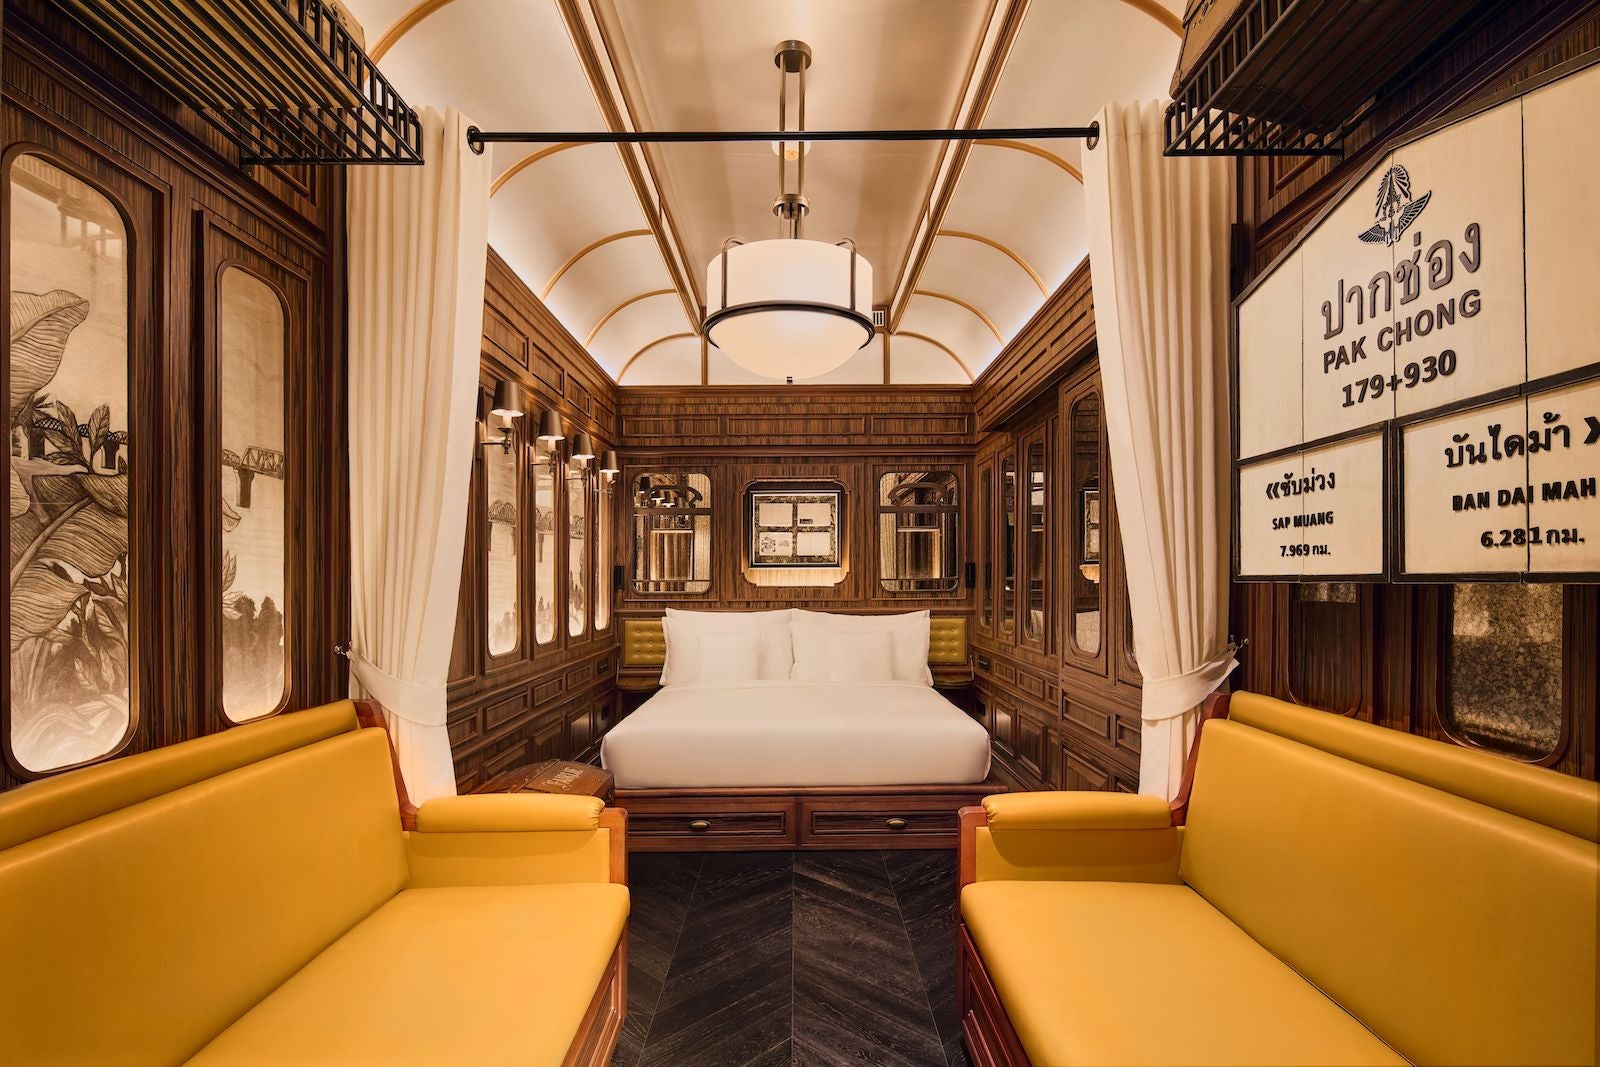 Sleep in a luxury vintage train car with a private pool at this new resort in Thailand